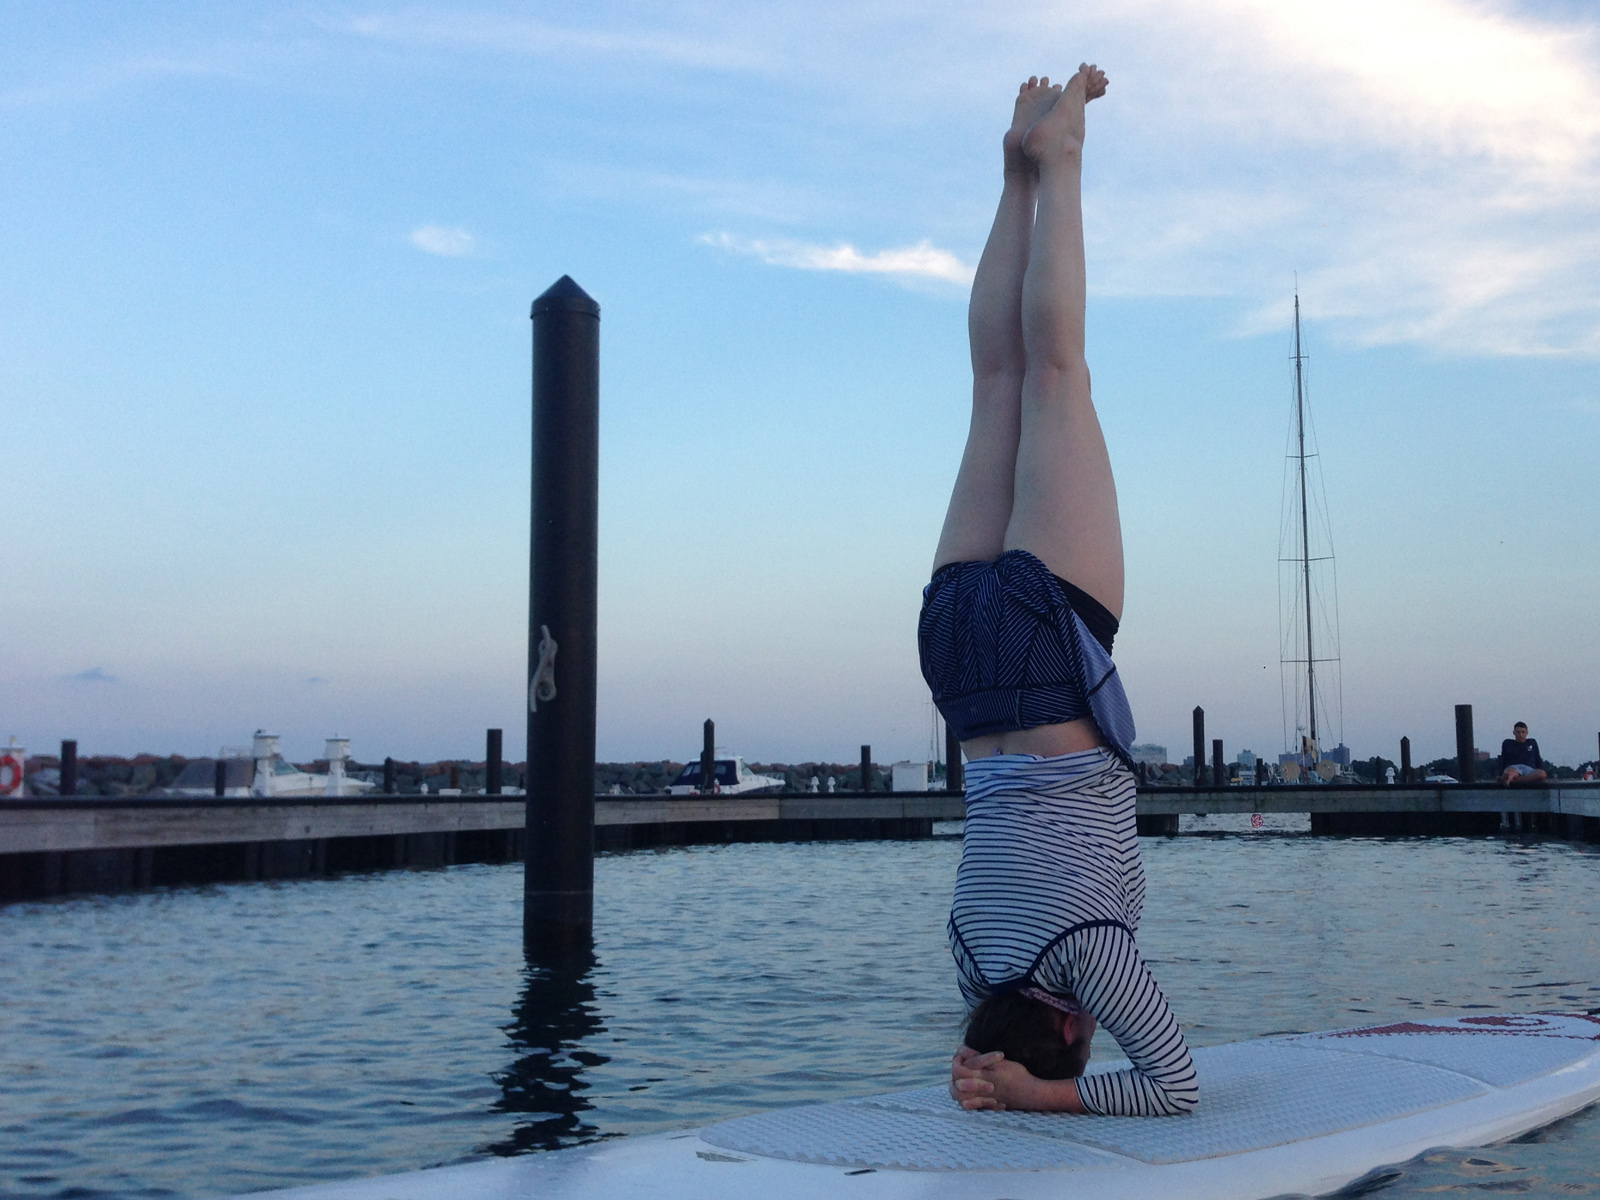 SUP Yoga 630pm Weekday Class at 31st St Harbor